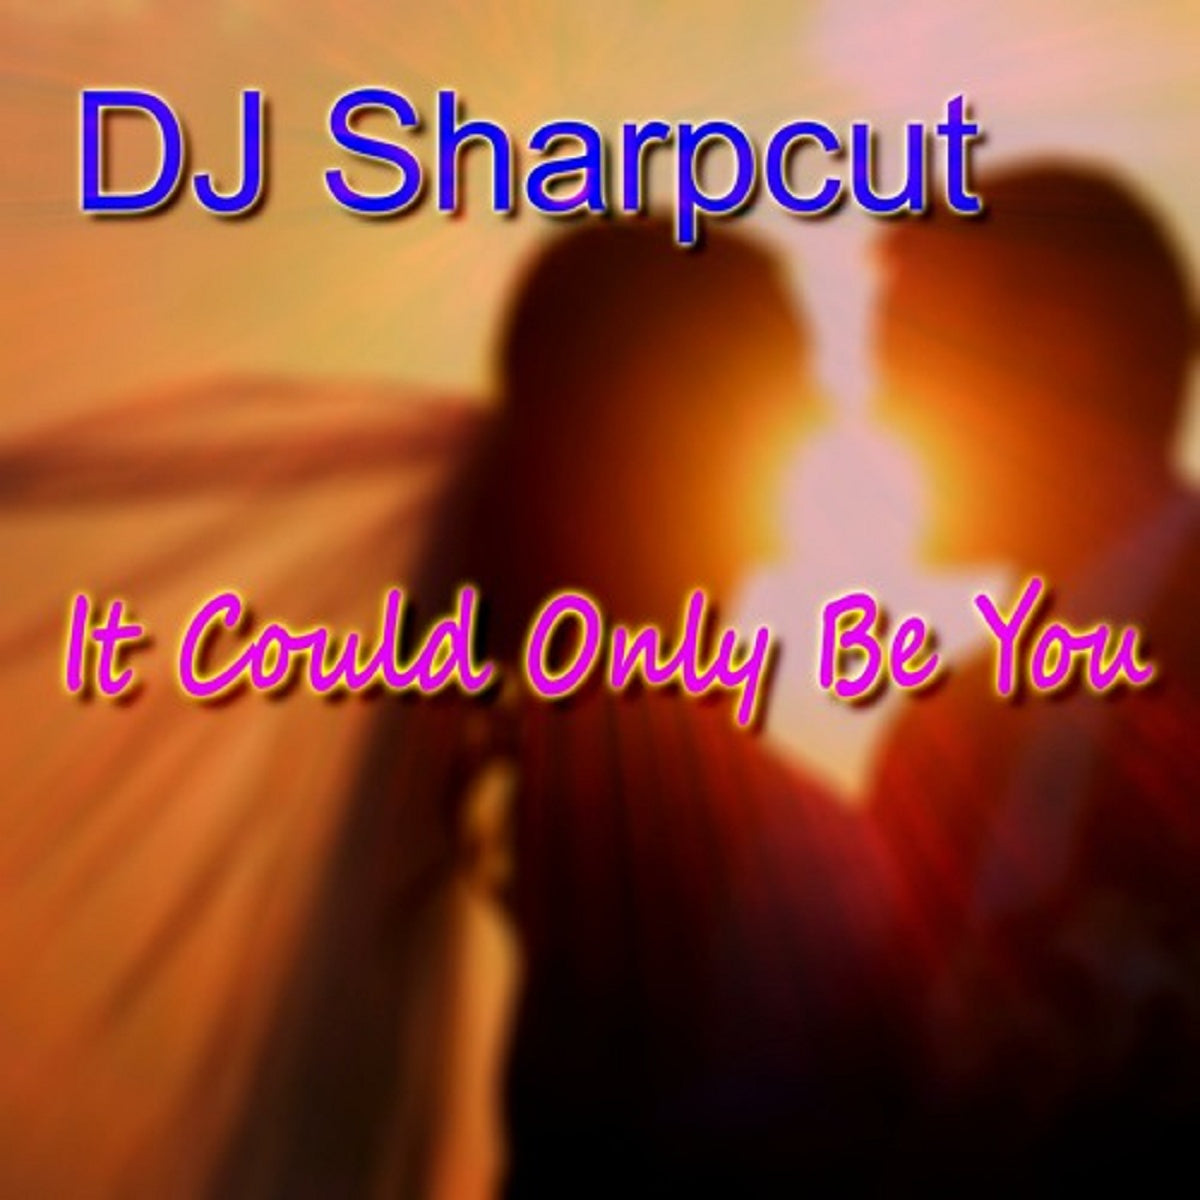 DJ Sharpcut – ‘It Could Only Be You’